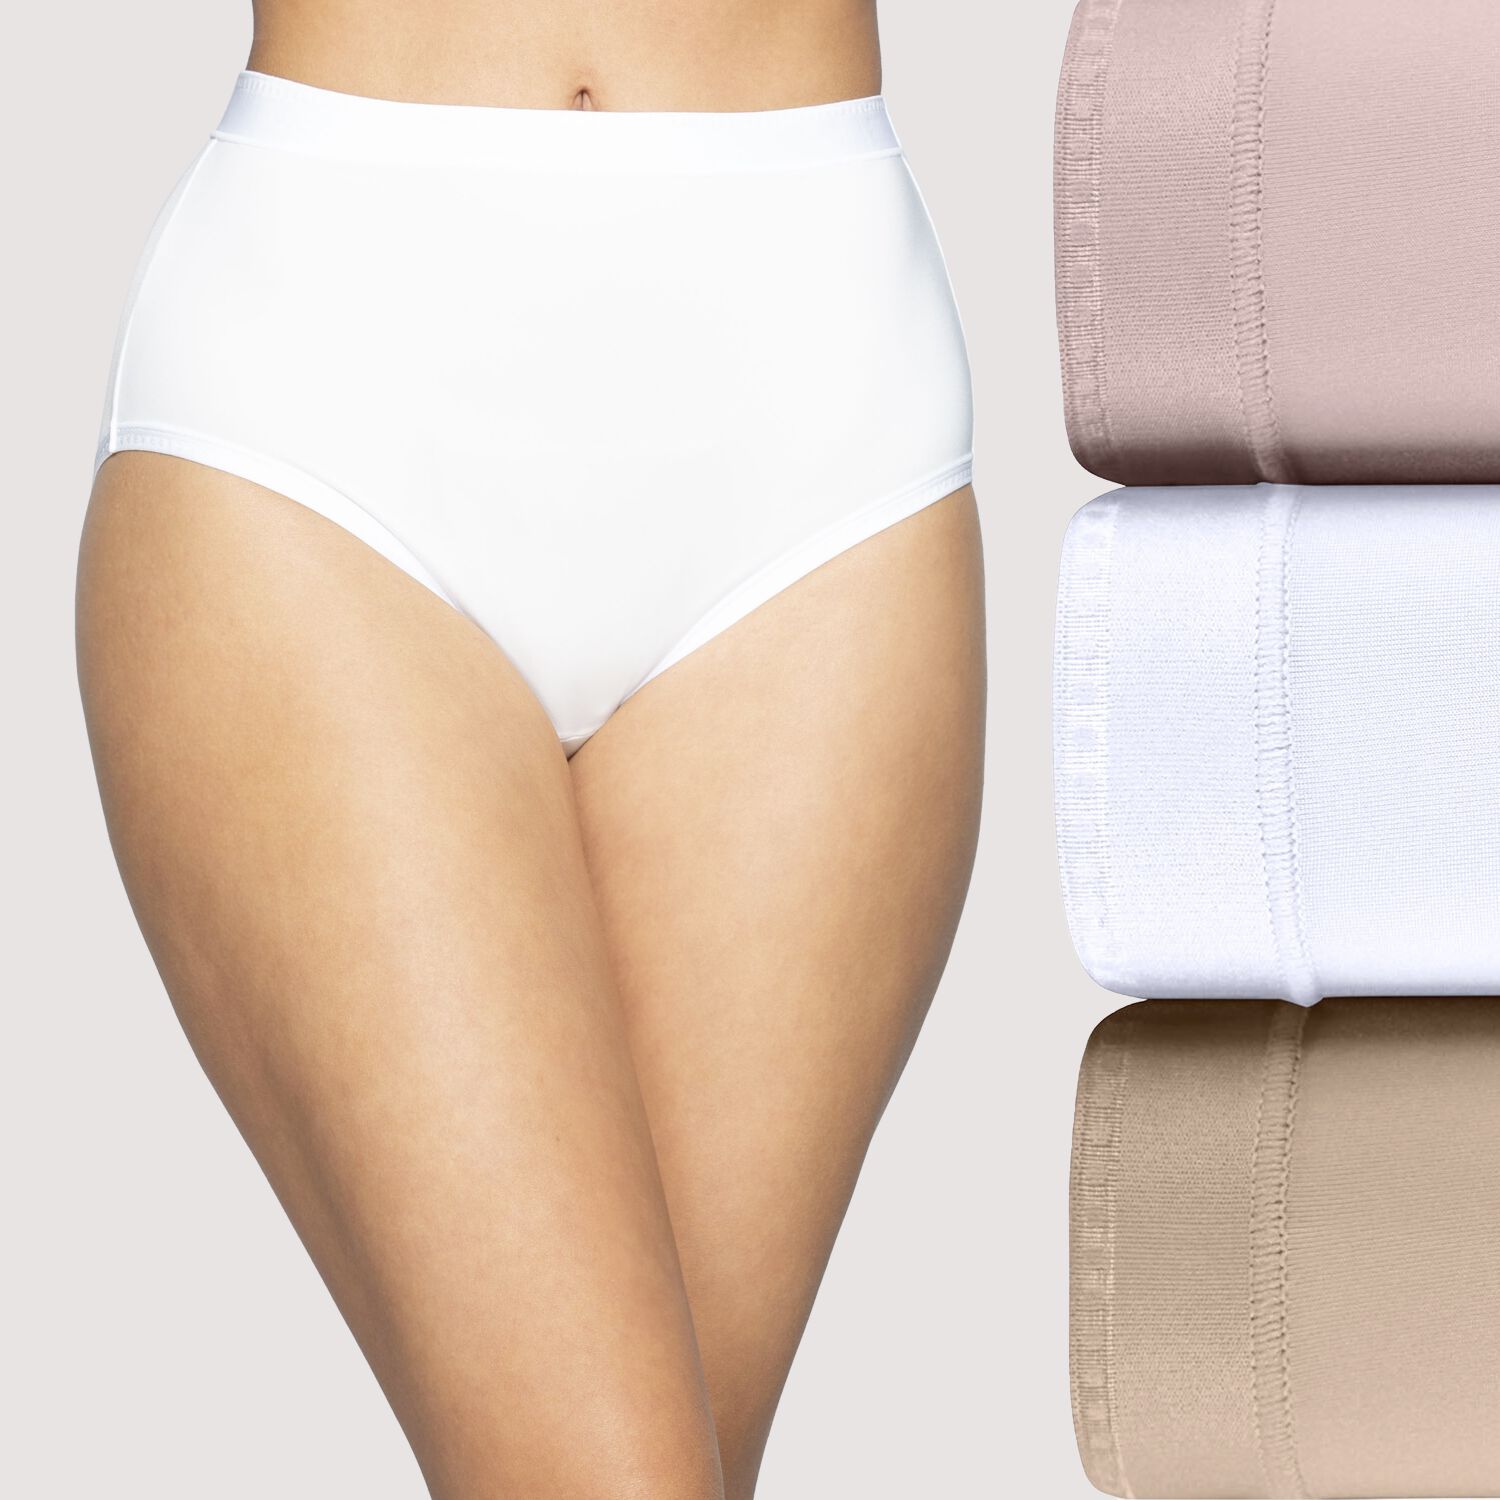 T Plus Plain Ladies Panties, Size: Large And XL at best price in